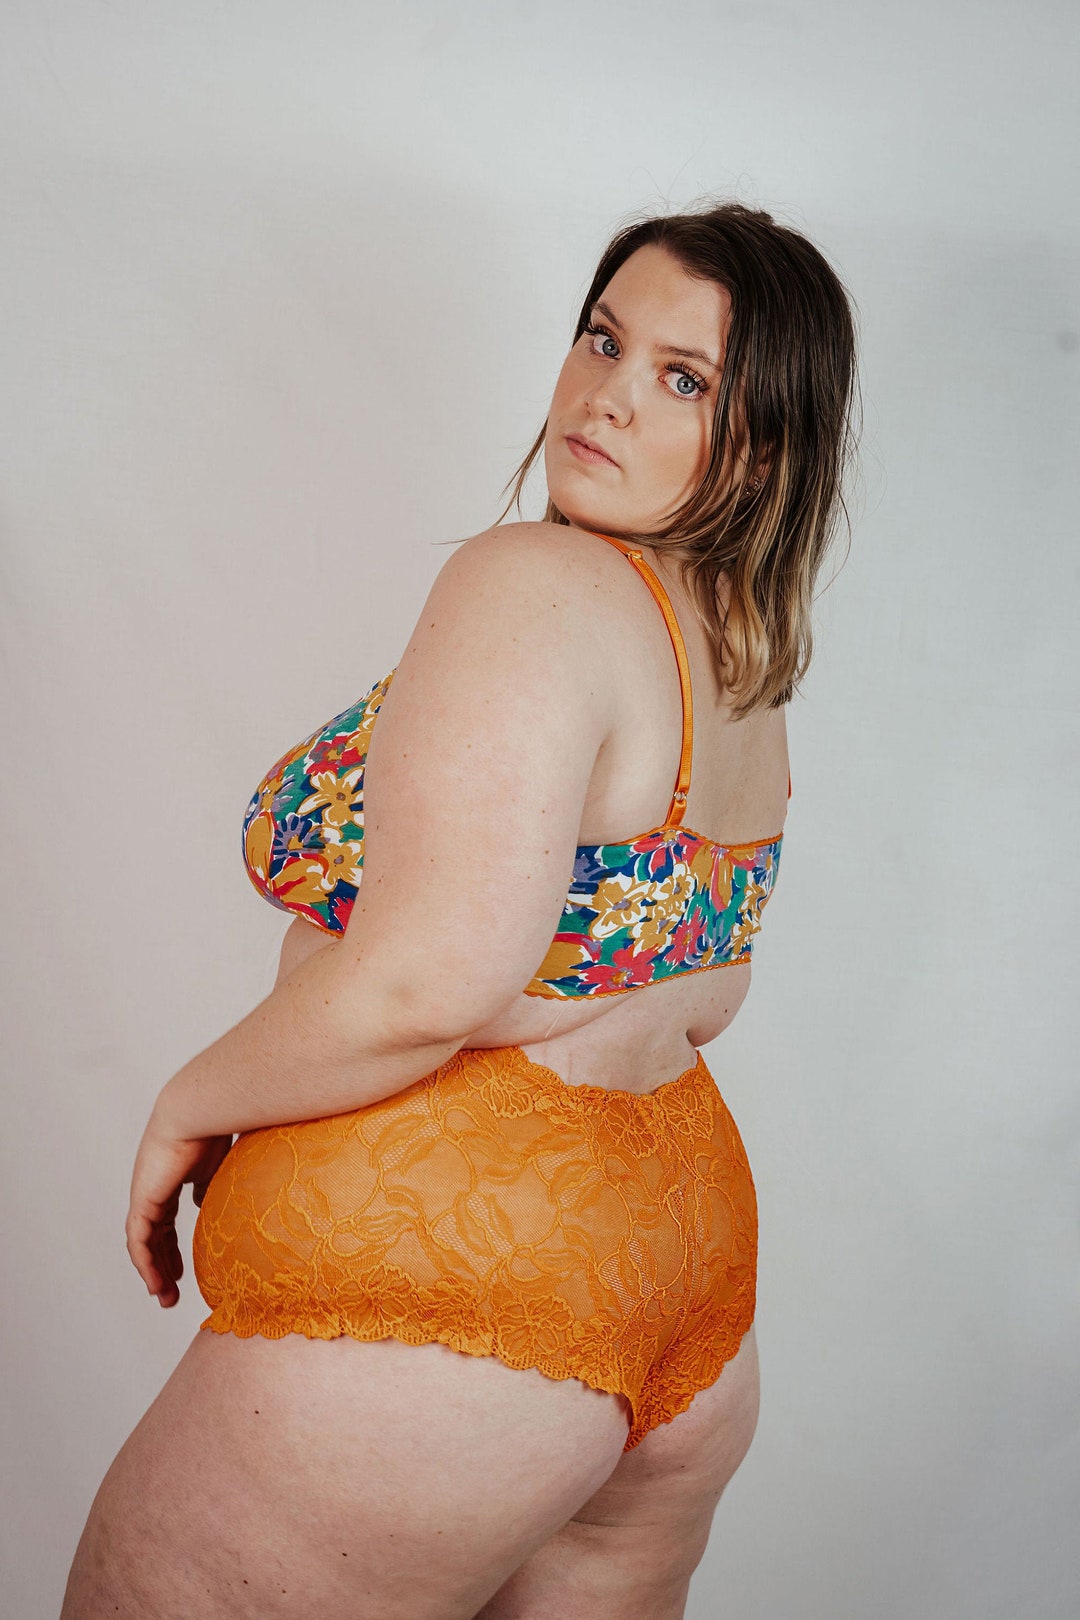 Orange Lace Plus Size French Knickers, Sexy Gift Idea for Her, Orange Lace Underwear  Panties 